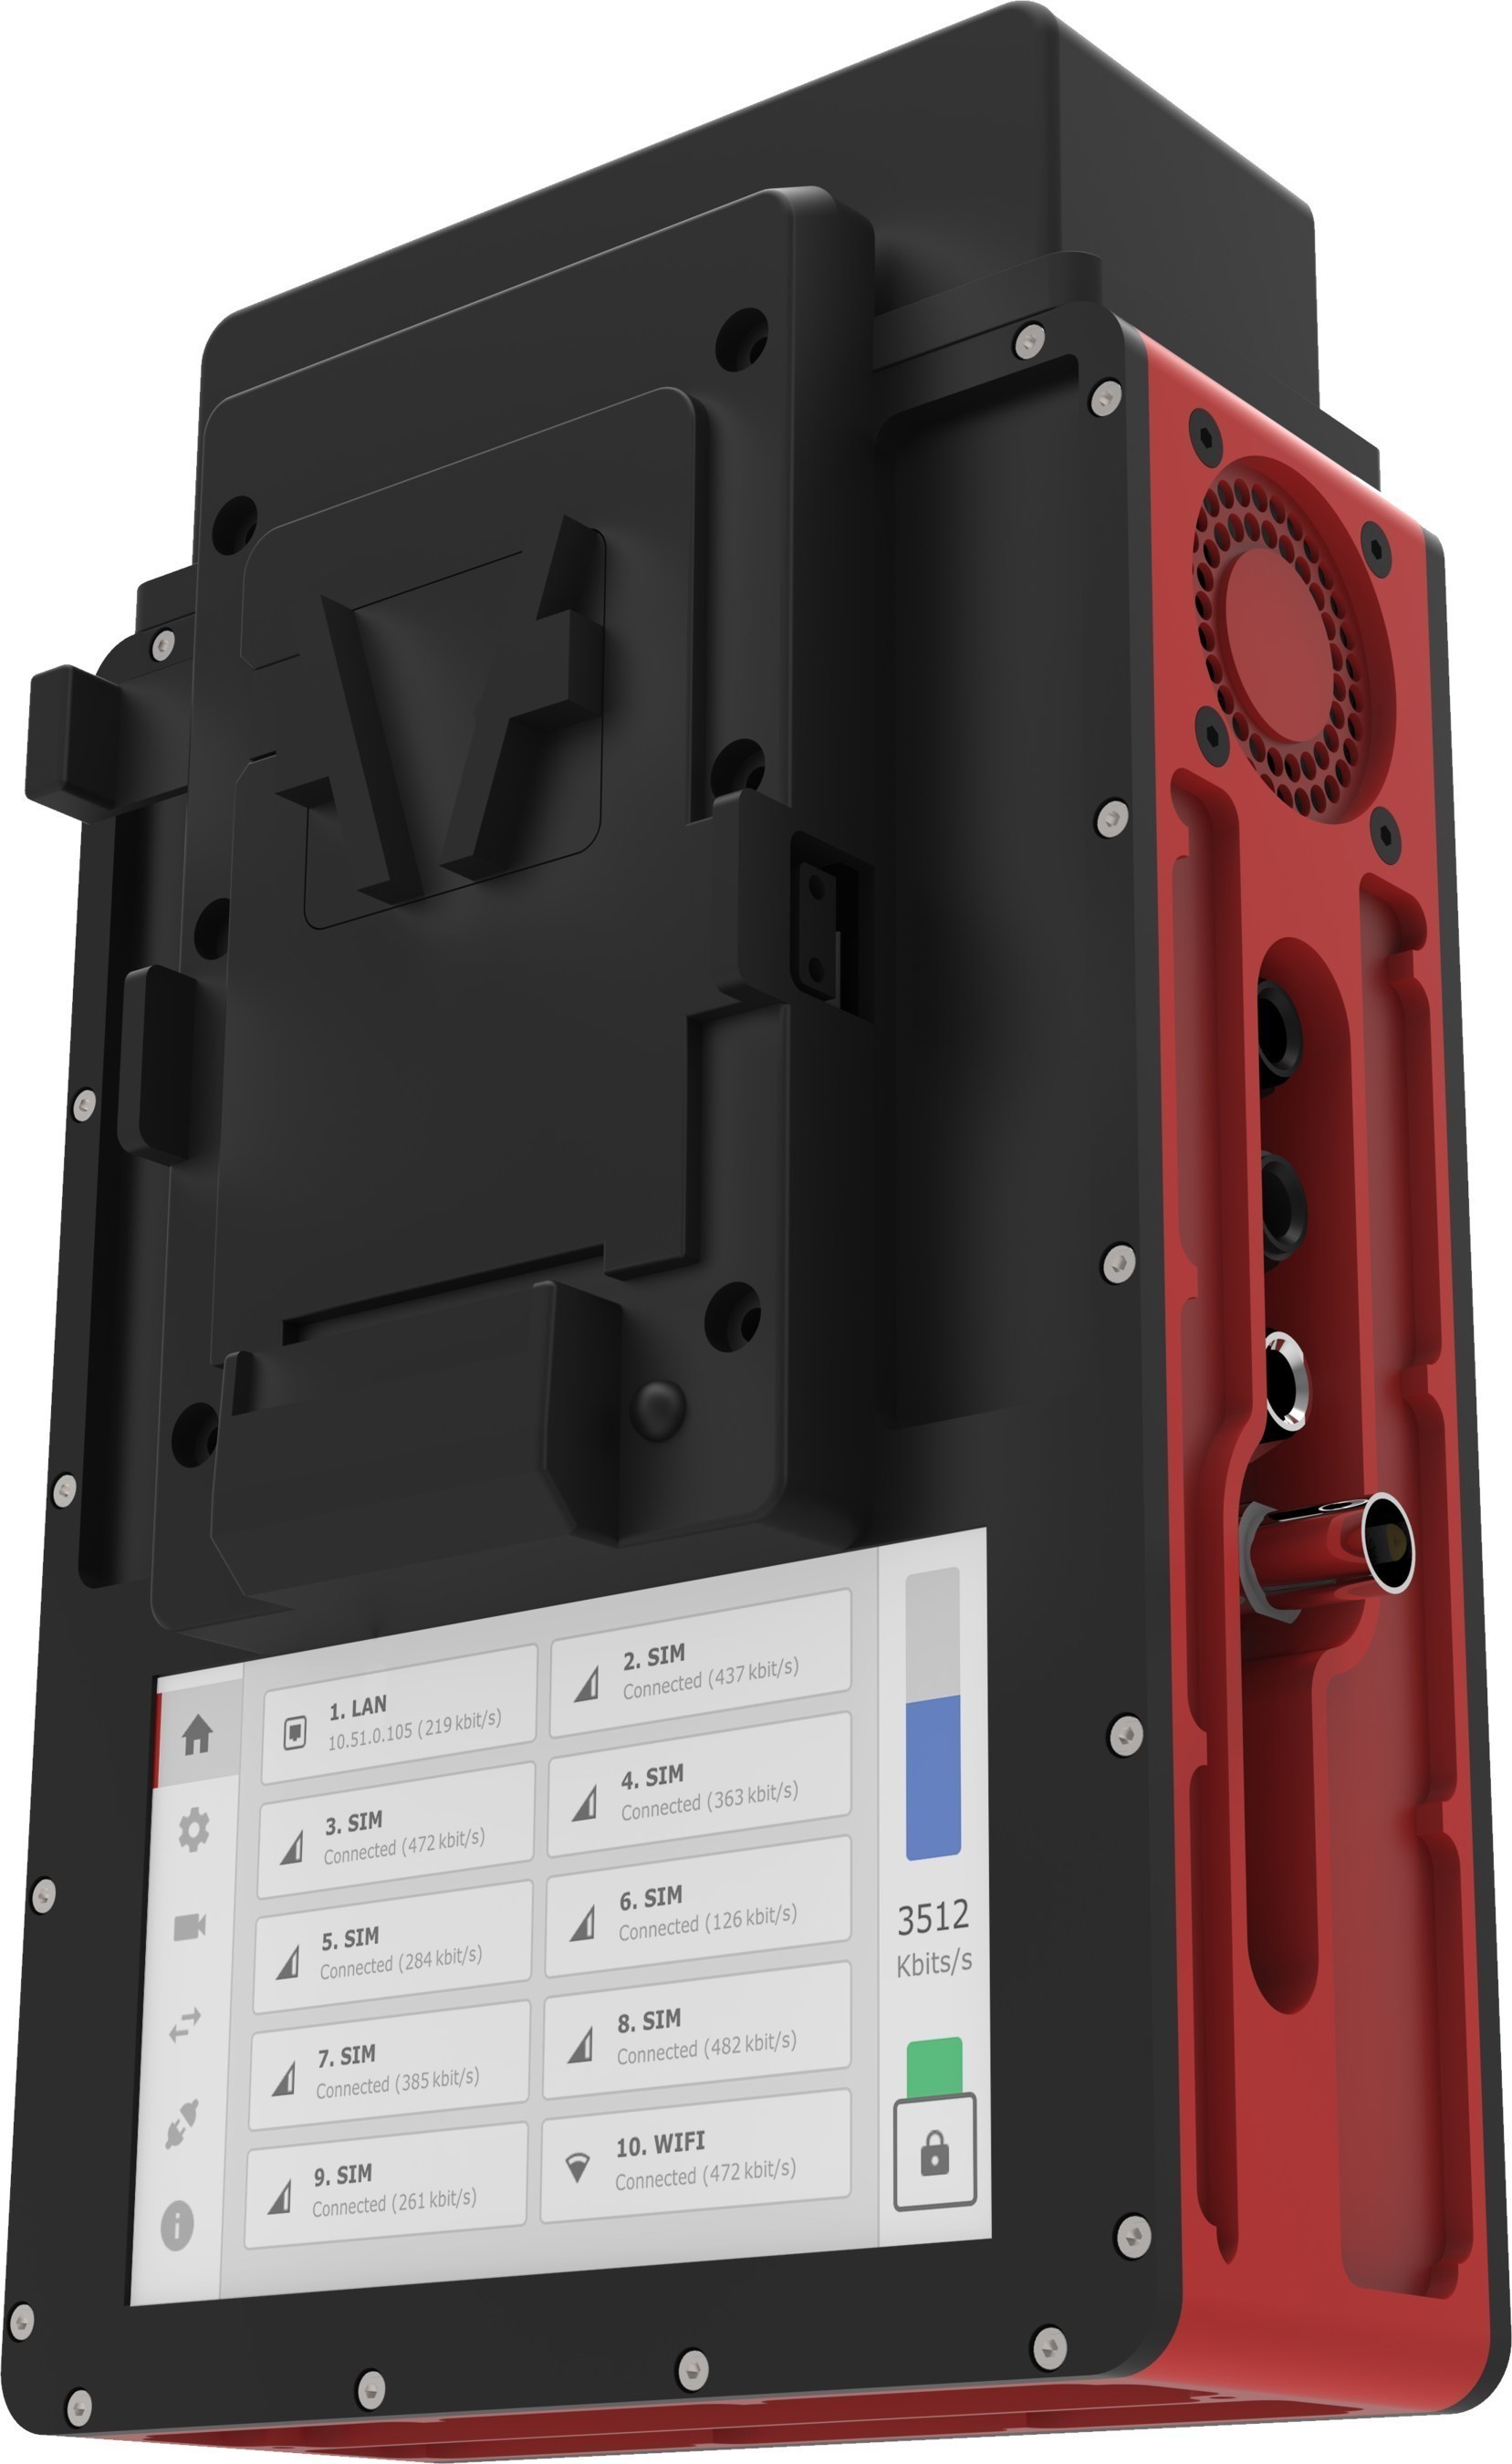 Mobile Viewpoint introduces the world's first ruggedized H265 encoder at NAB 2016